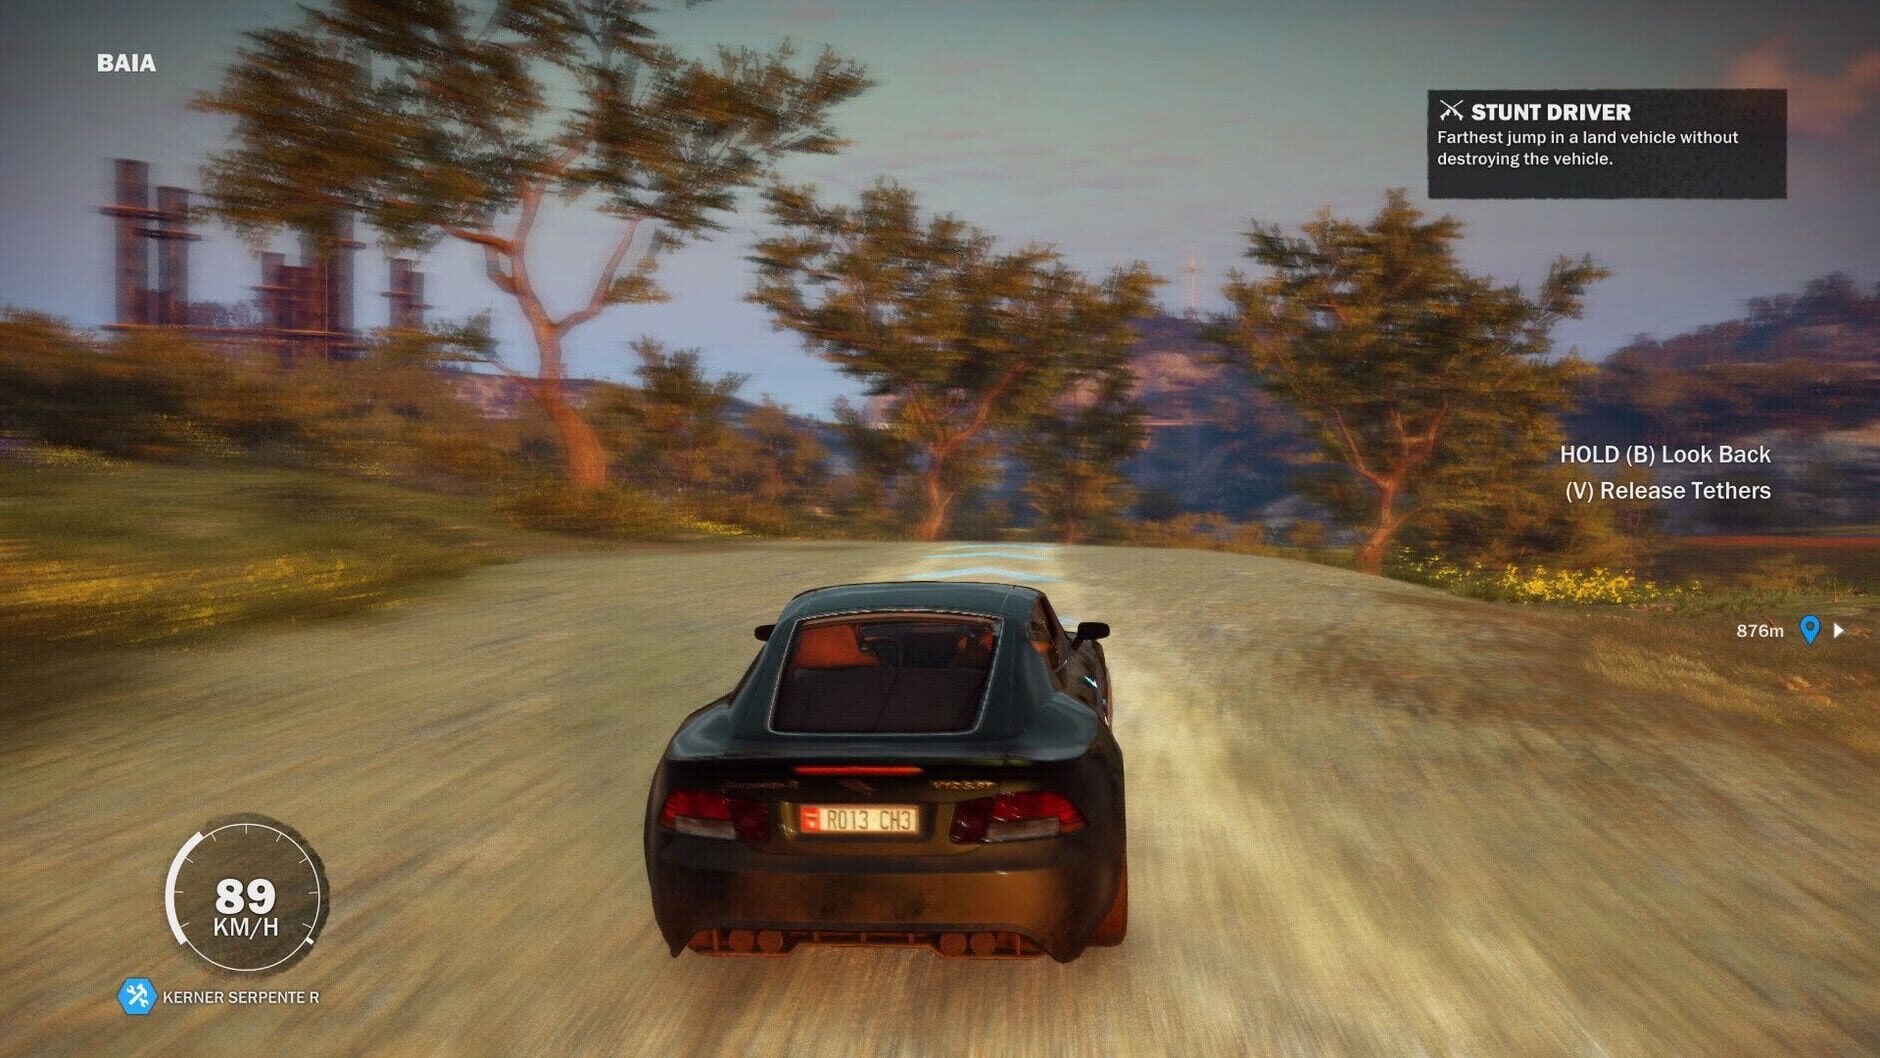 Screenshot for Just Cause 3: Collector's Edition